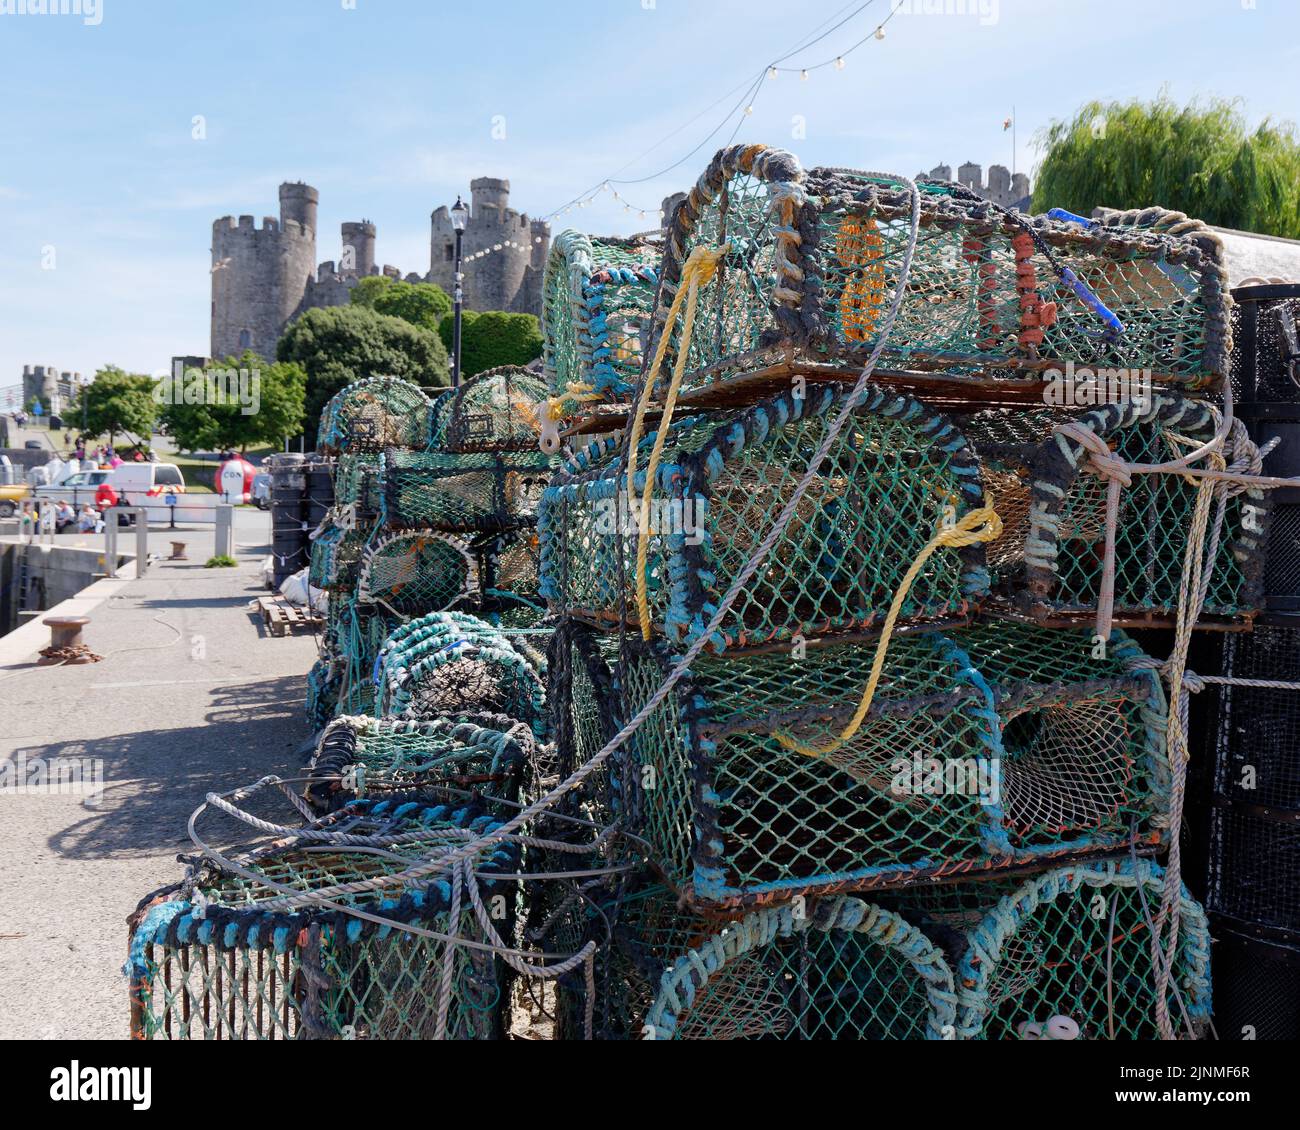 Conwy, Clwyd, Wales, August 07 2022: Fishing baskets stacked in the harbour with Conwy Castle in the background. Stock Photo